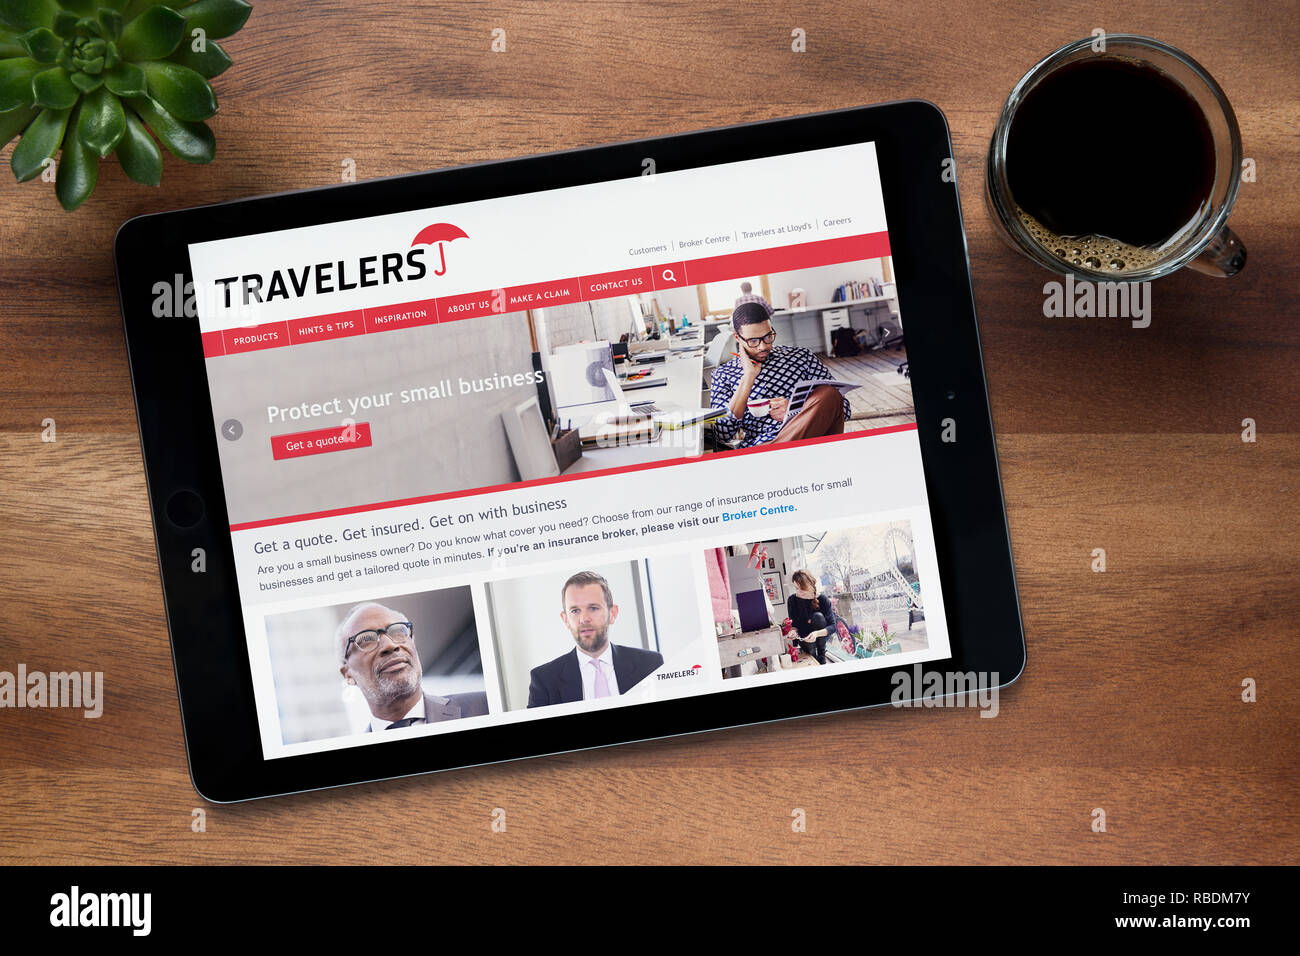 The website of Travelers business insurance is seen on an iPad tablet, resting on a wooden table (Editorial use only). Stock Photo